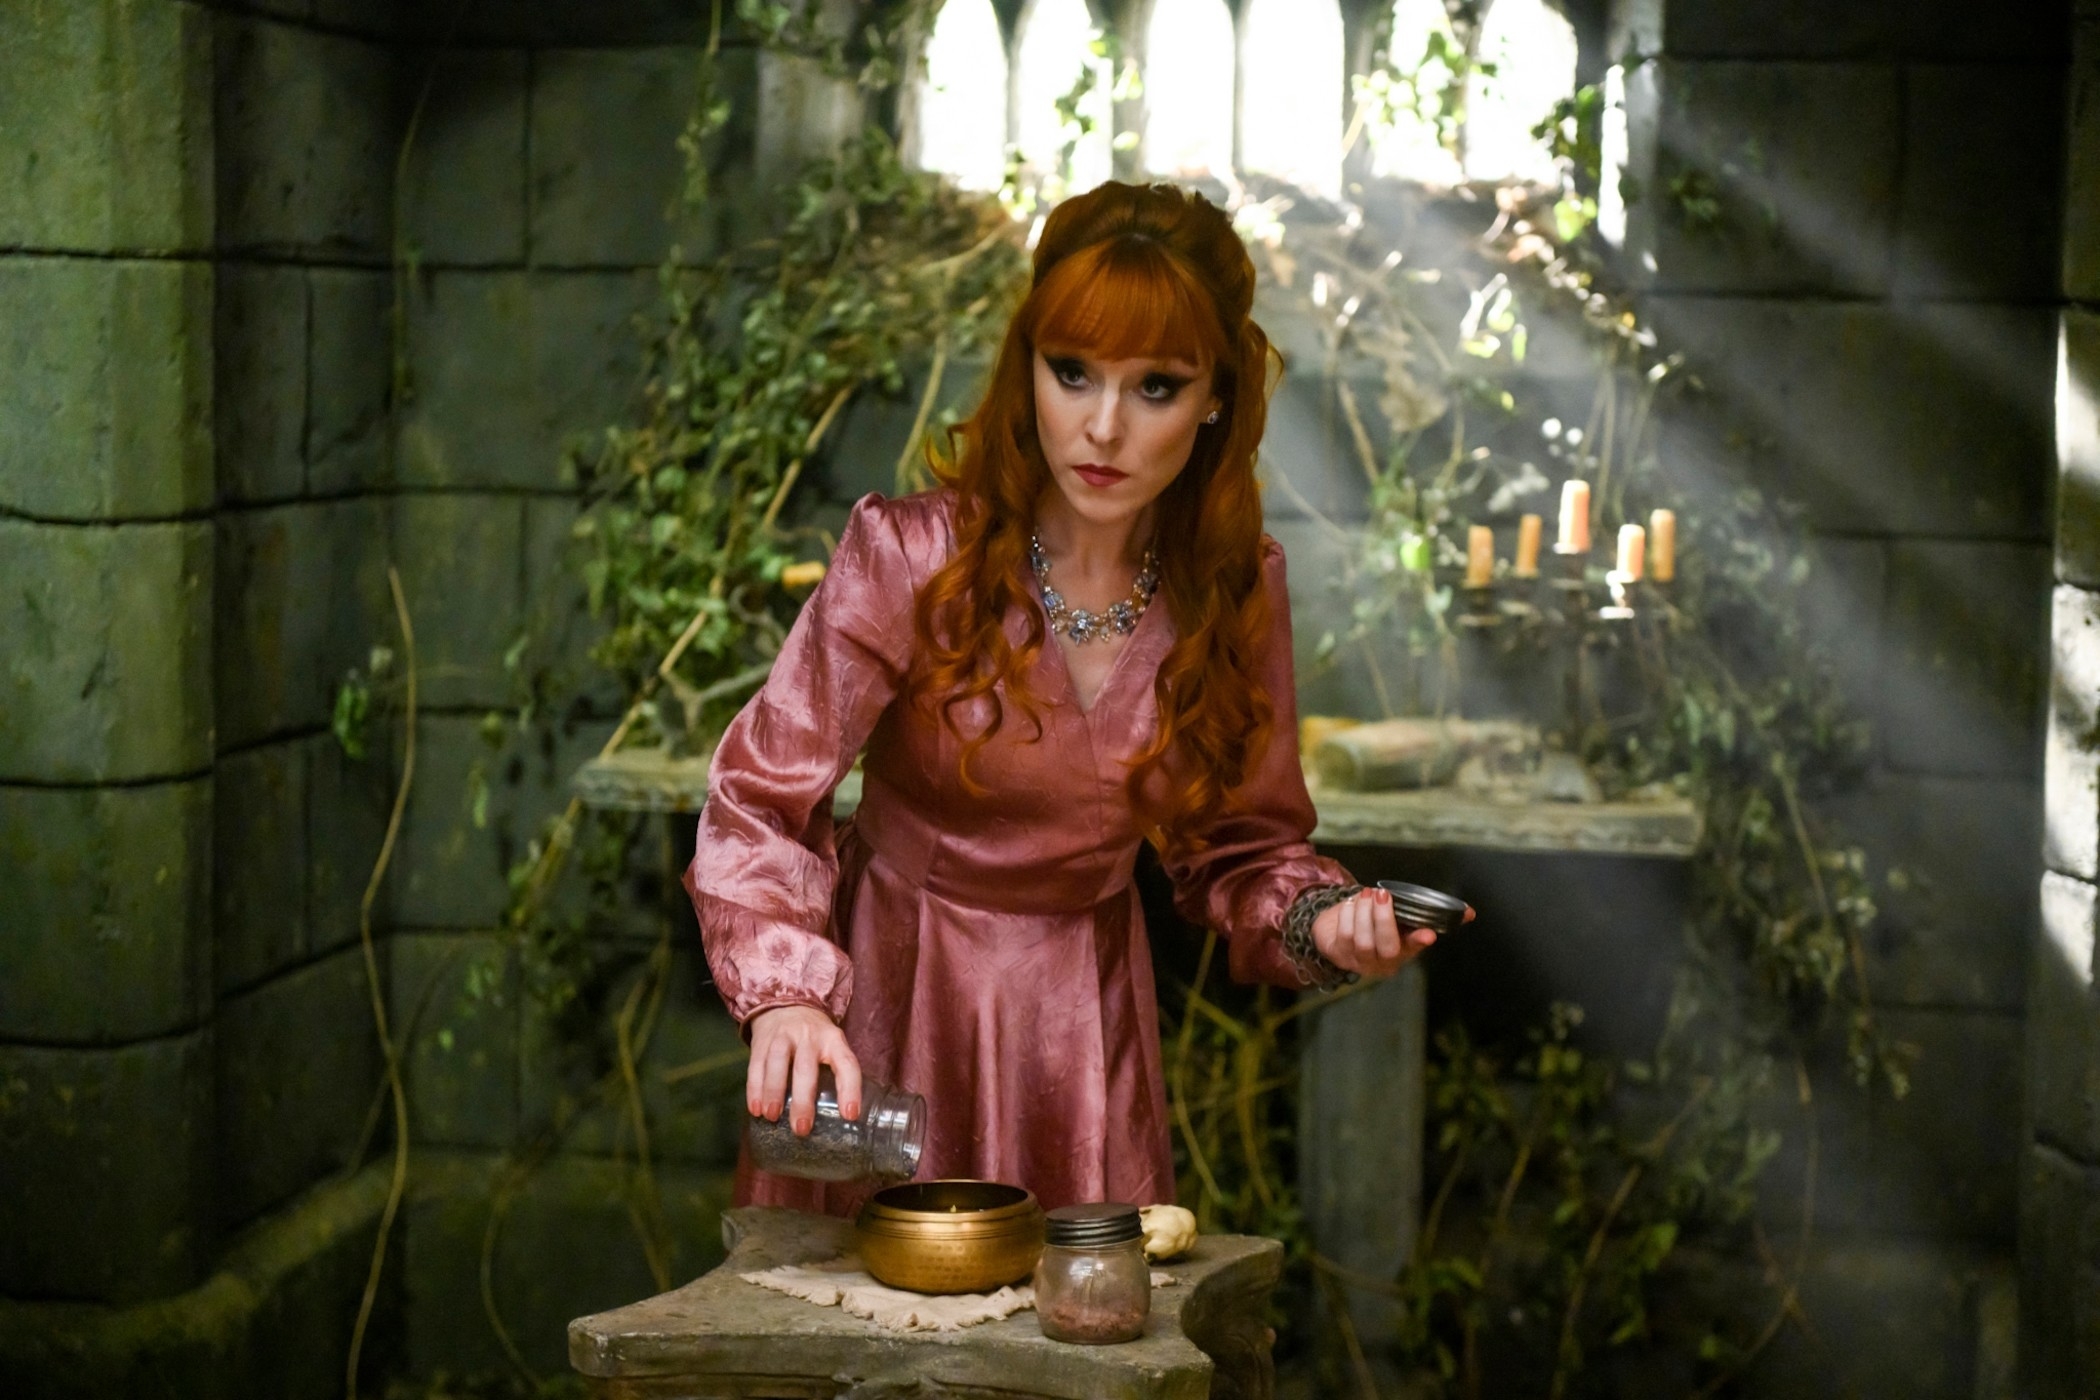 Elsa from Frozen in a satin dress, gesturing at a table with mystical props in an enchanted forest setting